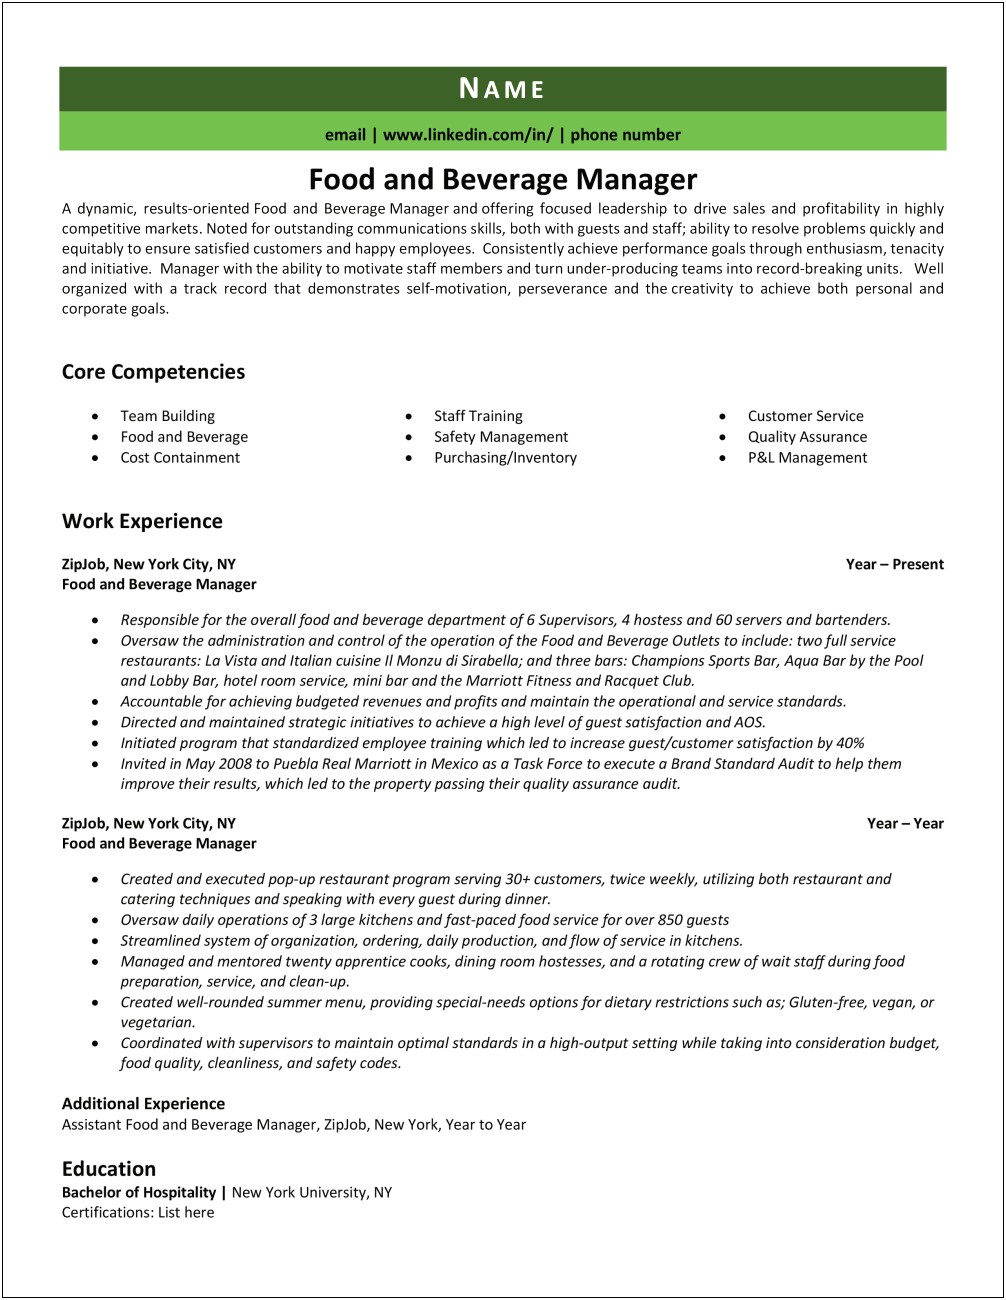 Example Of Resume For Food And Beverage Manager